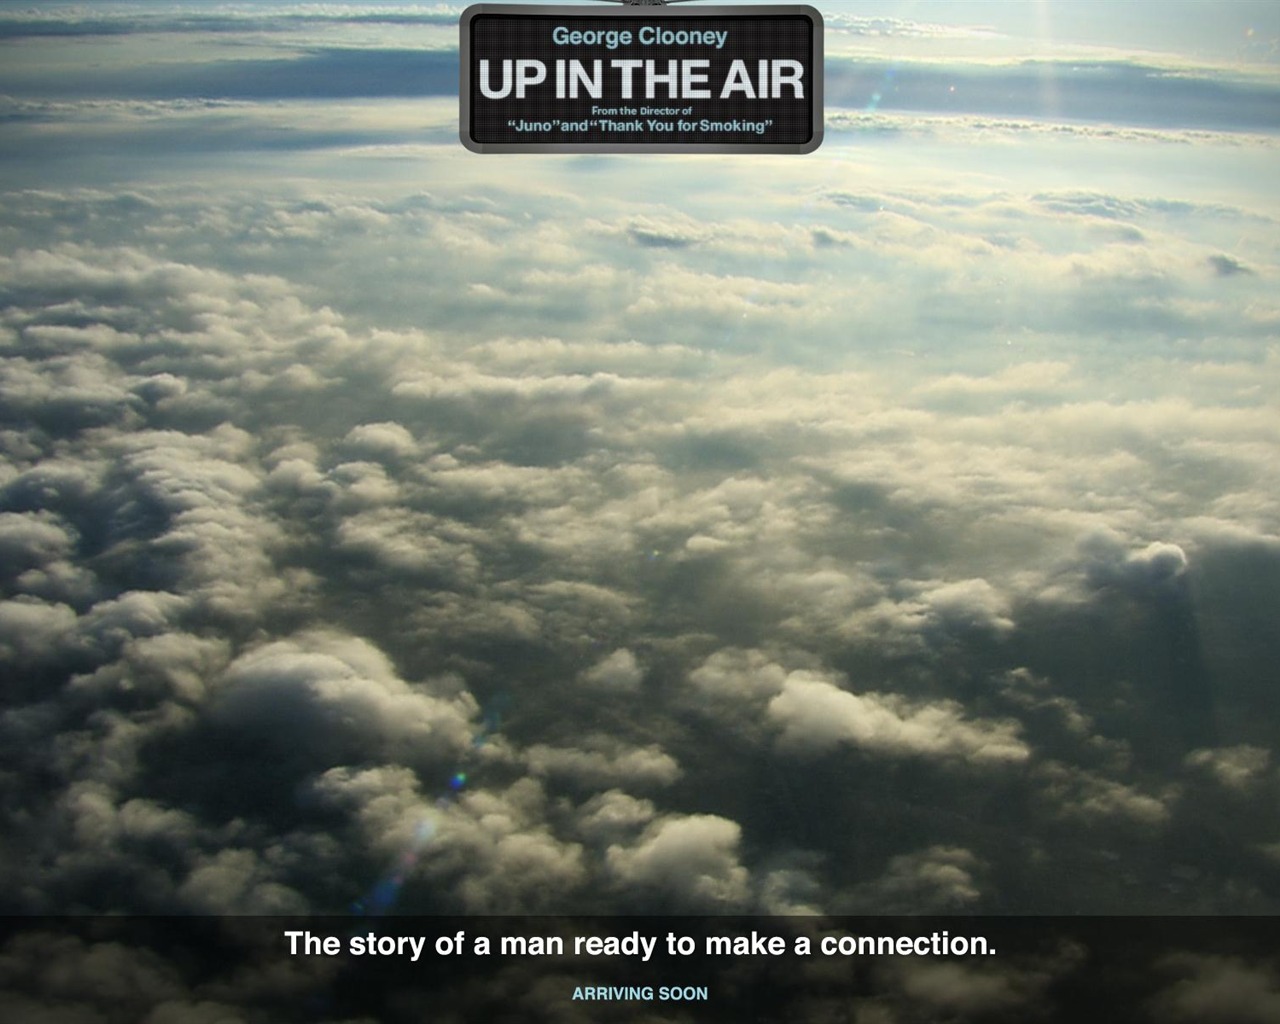 Up in the Air 在云端 高清壁纸20 - 1280x1024